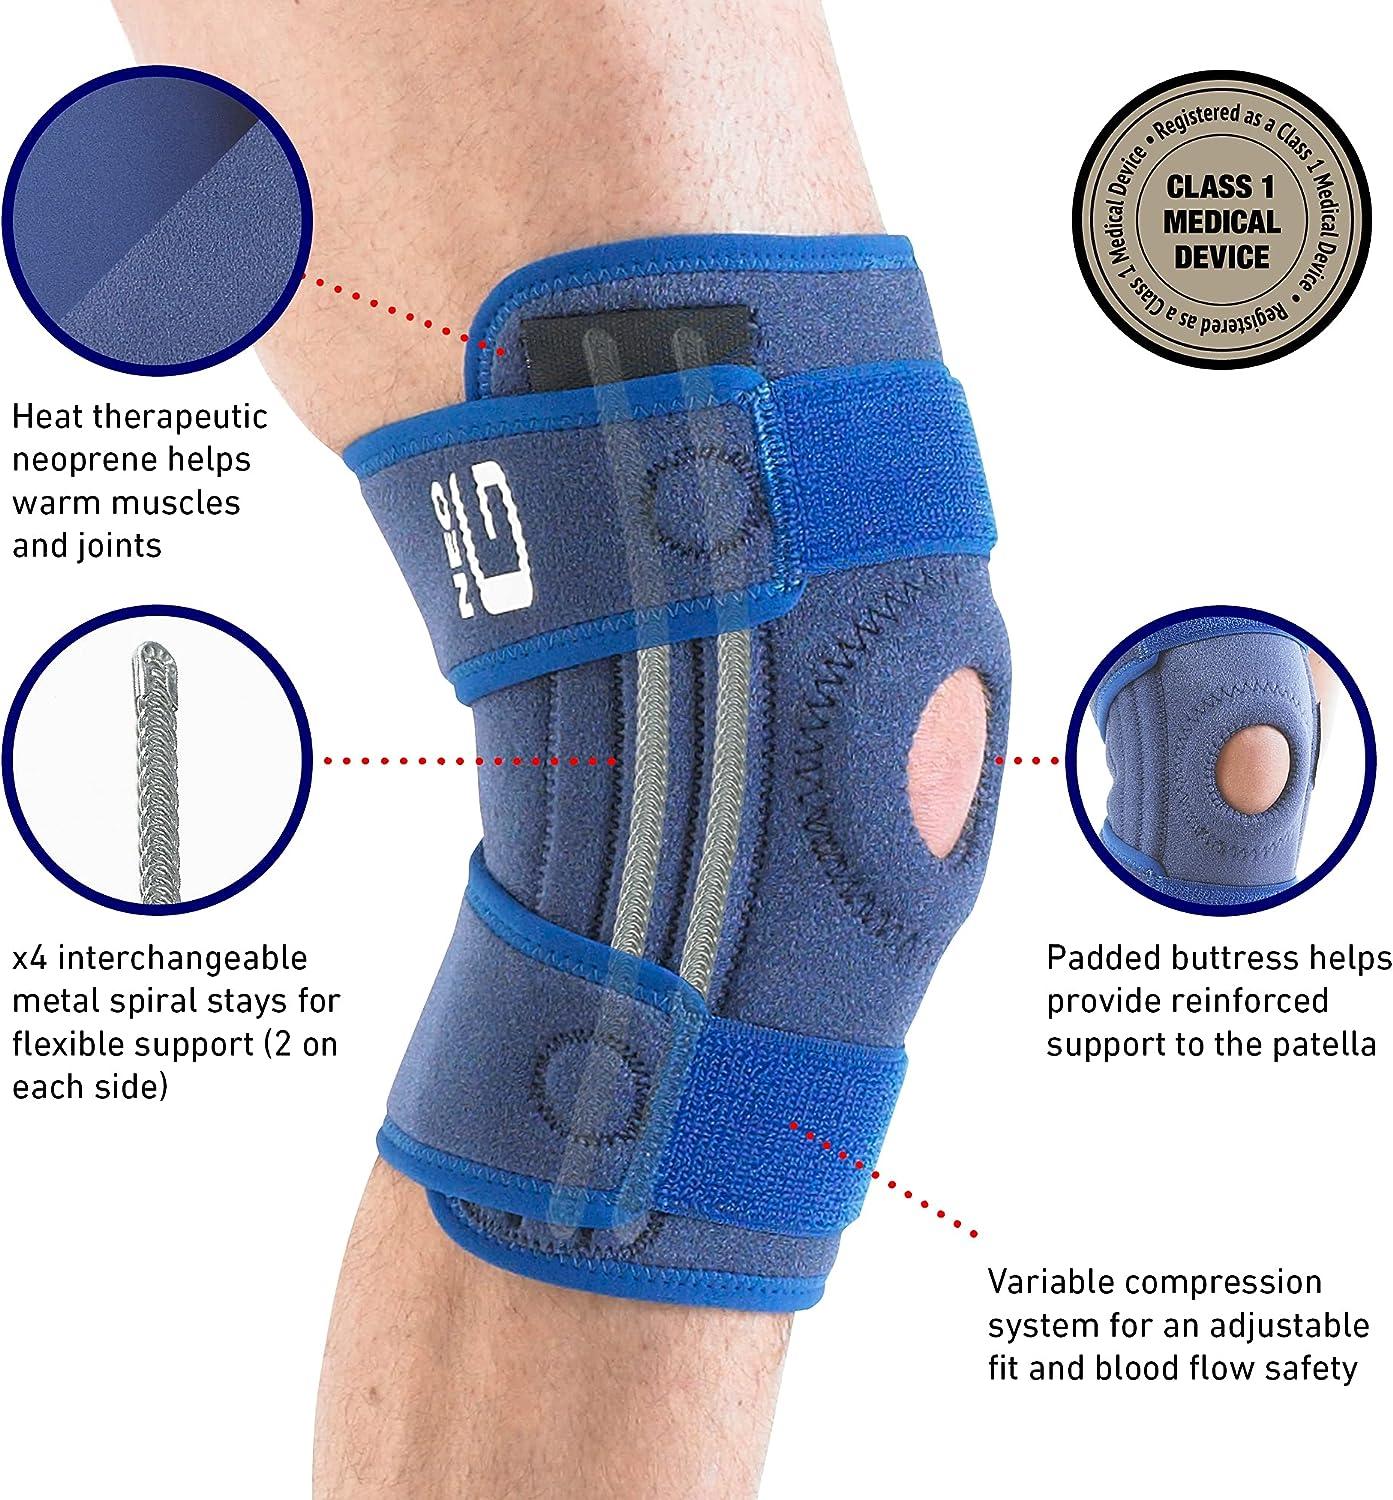  Neo-G Calf Brace for Shin Splints, Lower Leg Pain Relief - Calf  Brace for Torn Calf Muscle, Running, Sports, Recovery - Adjustable Calf  Support - Class 1 Medical Device : Health & Household